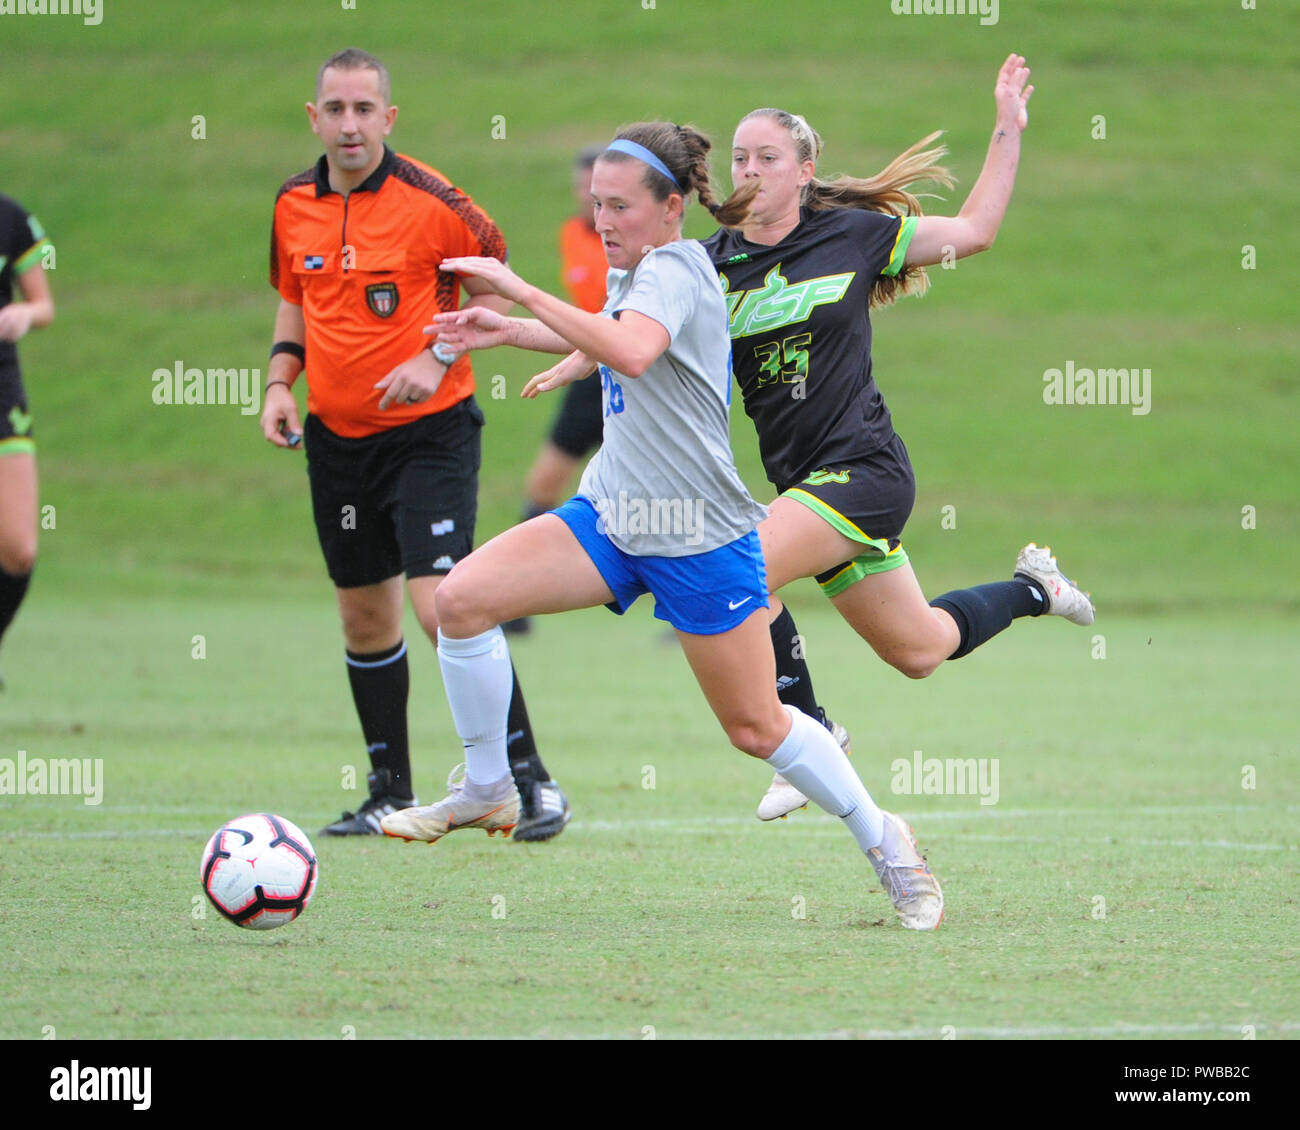 Memphis, TN, USA. 14th Oct, 2018. Memphis Tigers defender, STASIA MALLIN (26), moves the ball downfield as Central Florida midfielder, SYDNEY NASELLO (35), follows close behind, during the NCAA soccer game between the Memphis Tigers and the South Florida Bulls at Mike Rose Soccer Complex in Memphis, TN. USF defeated Memphis, 2-0. Kevin Langley/CSM/Alamy Live News Stock Photo